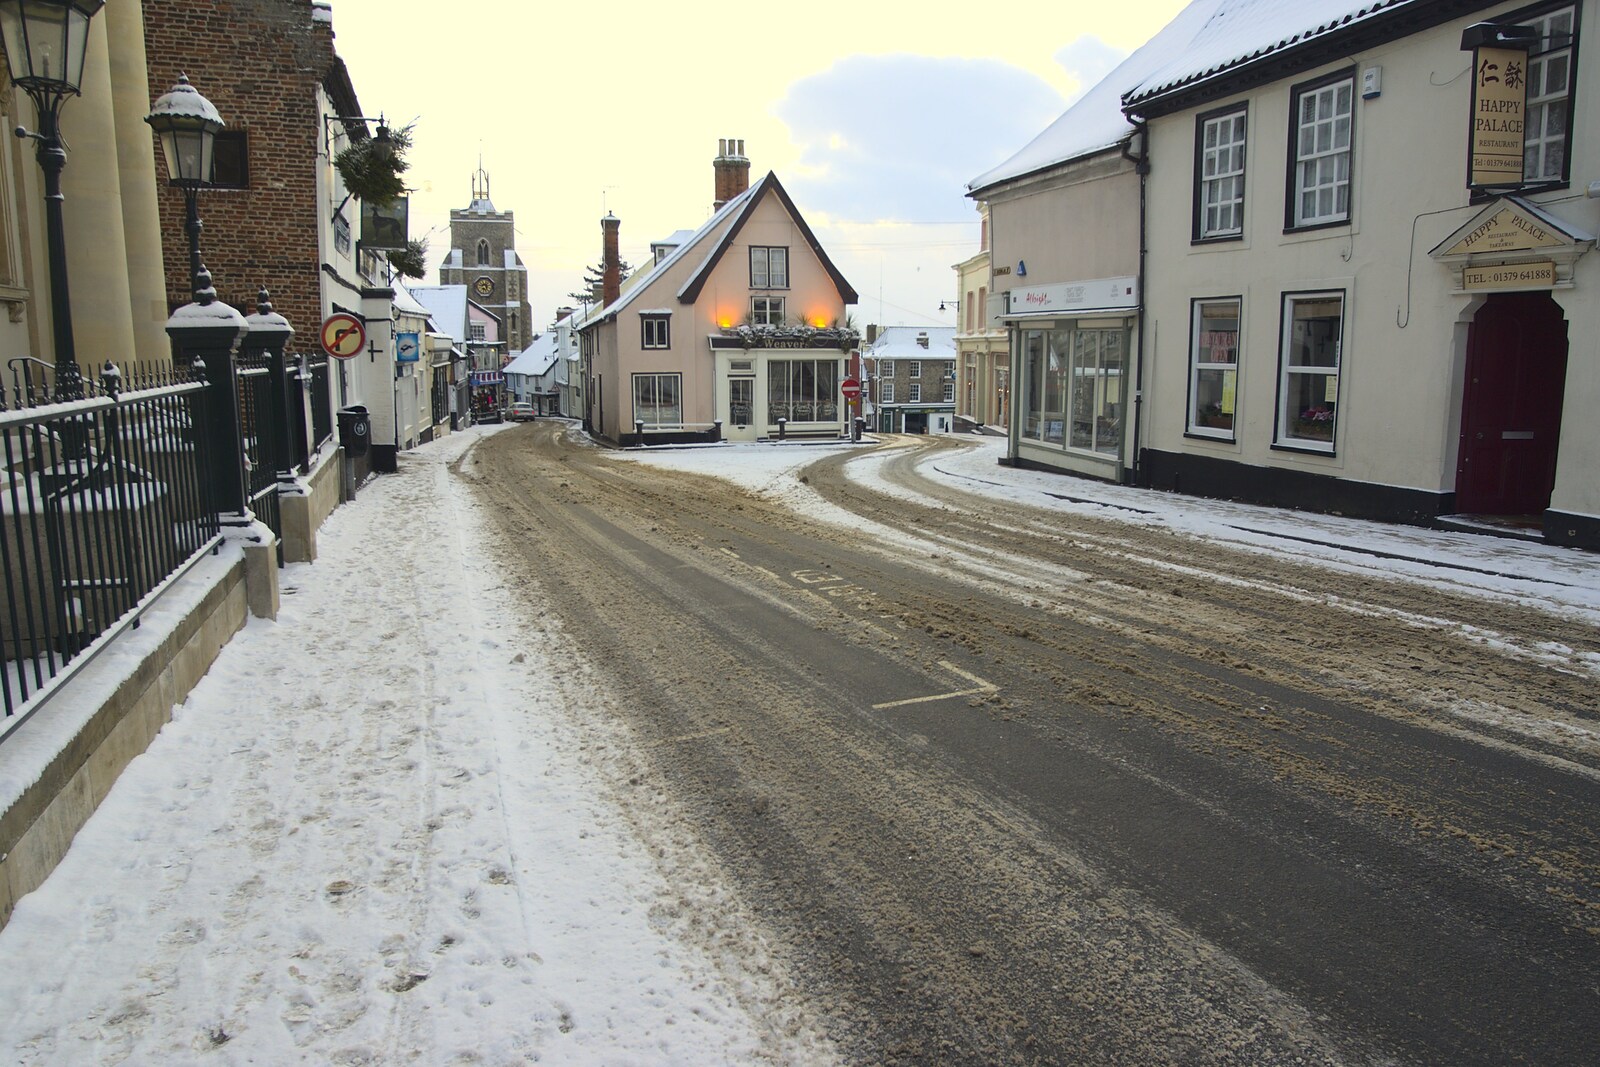 A Snowy Miscellany, Diss, Norfolk - 9th January 2010: Looking down St. Nicholas Street towards the church